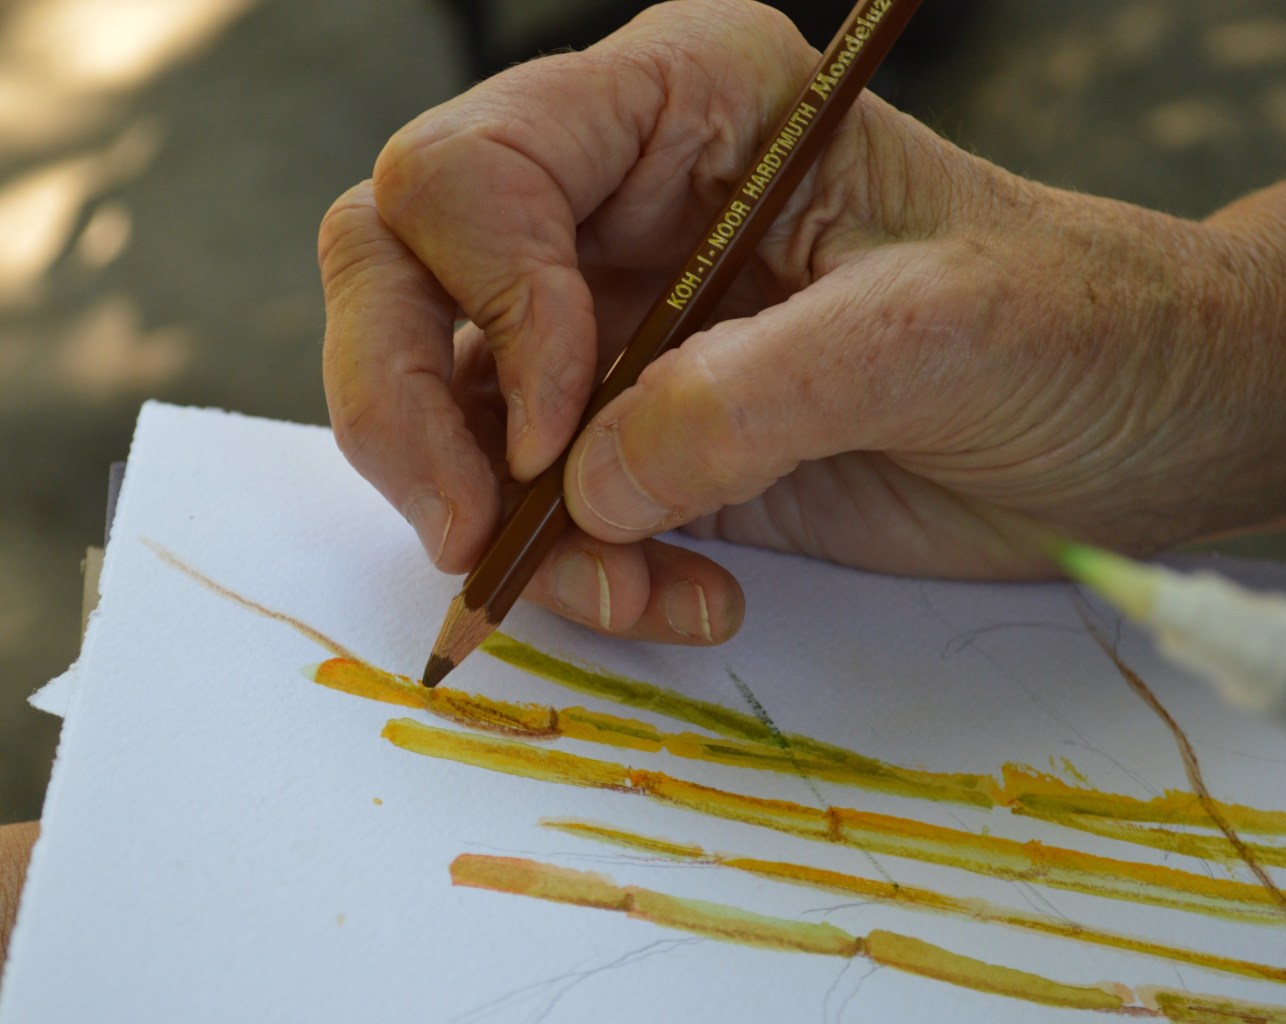 A close-up of a hand holding a colored pencil, drawing stalks of bamboo on paper.